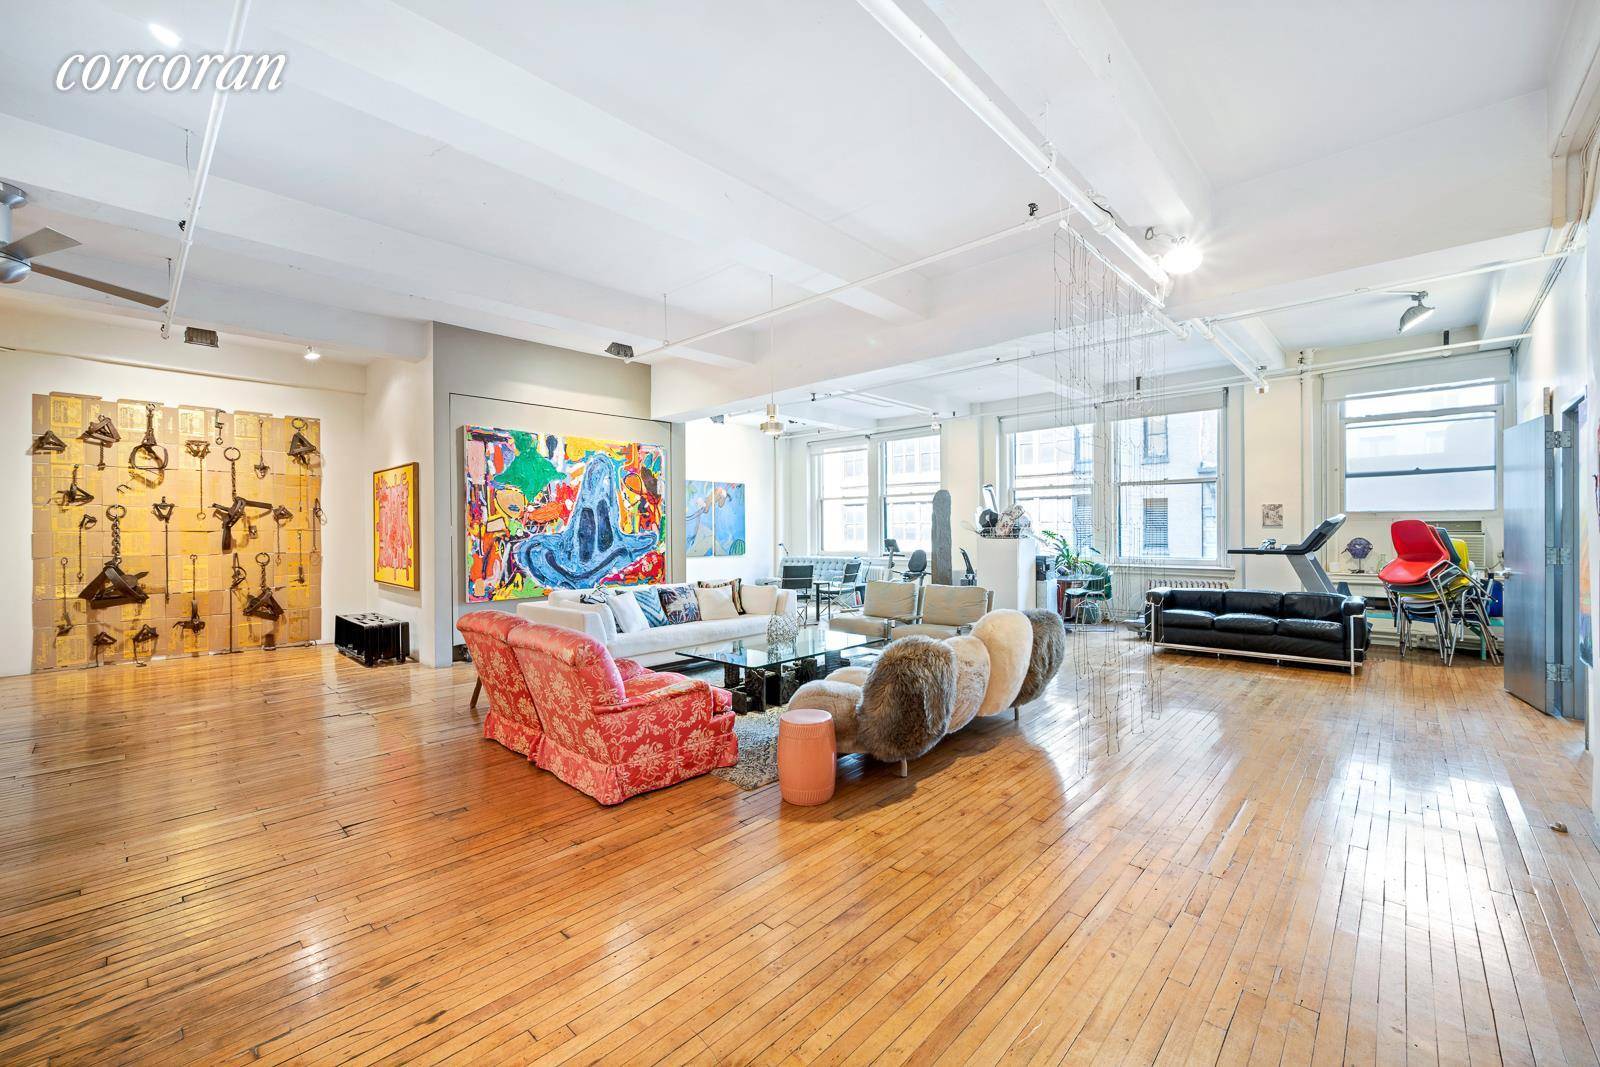 Architect ready 4000sqft pre war loft with 11 foot ceilings and oversized windows throughout.